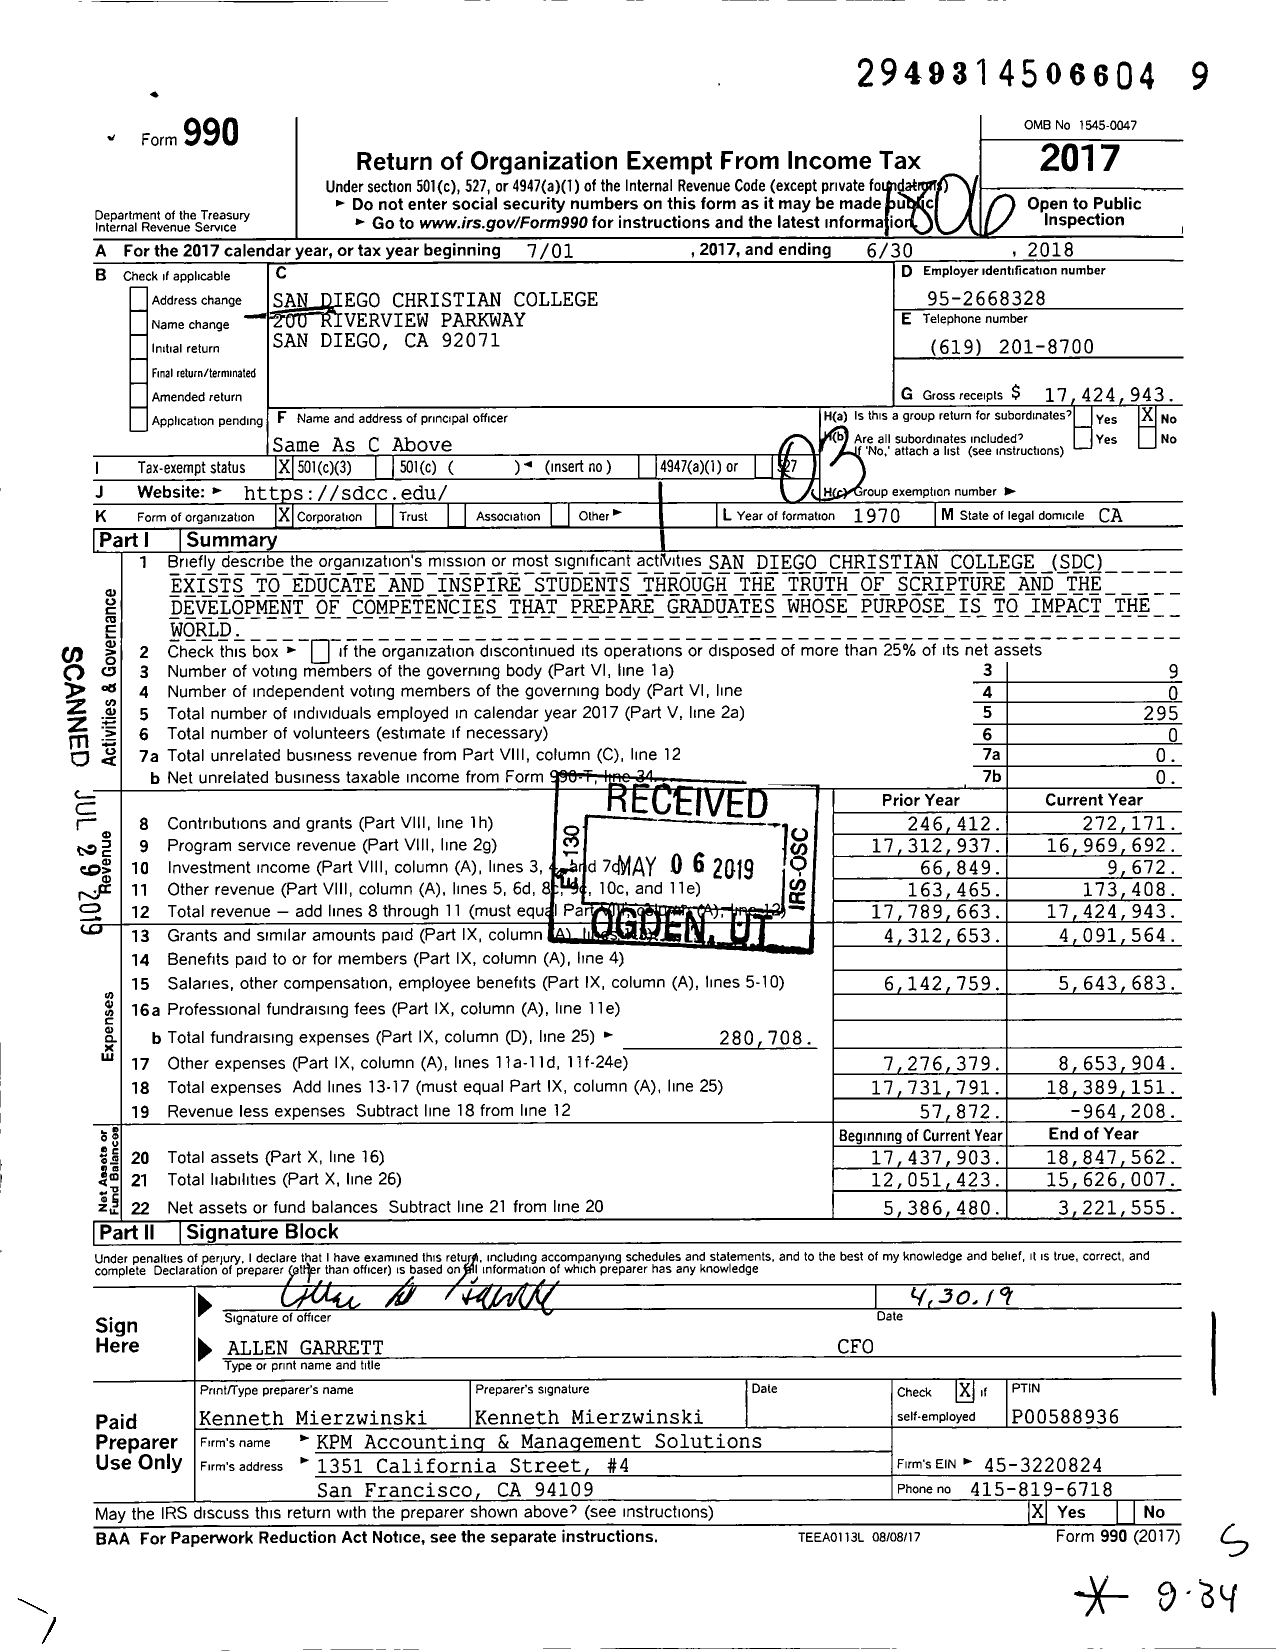 Image of first page of 2017 Form 990 for San Diego Christian College (SDC)